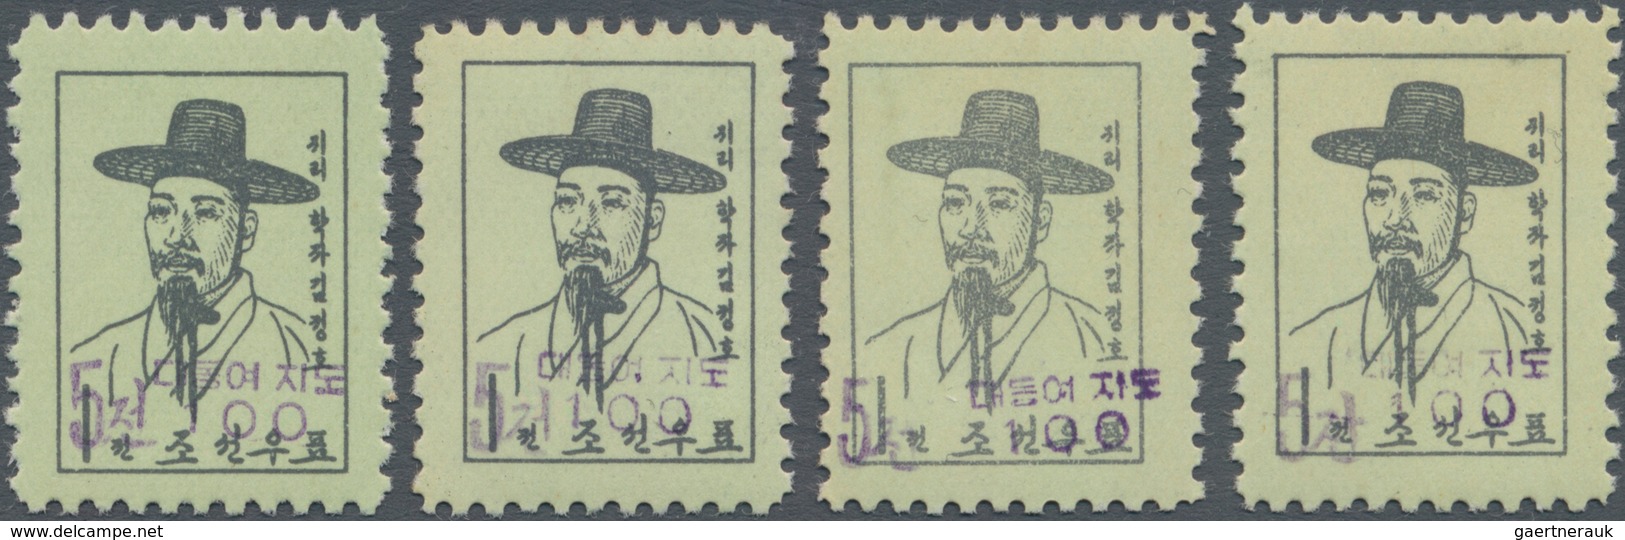 Korea-Nord: 1961, 5 Ch./1 Ch. Surcharge Kim Jung-Ho, Four Copies, MNH (3), Unused Mounted Mint (1). - Korea, North